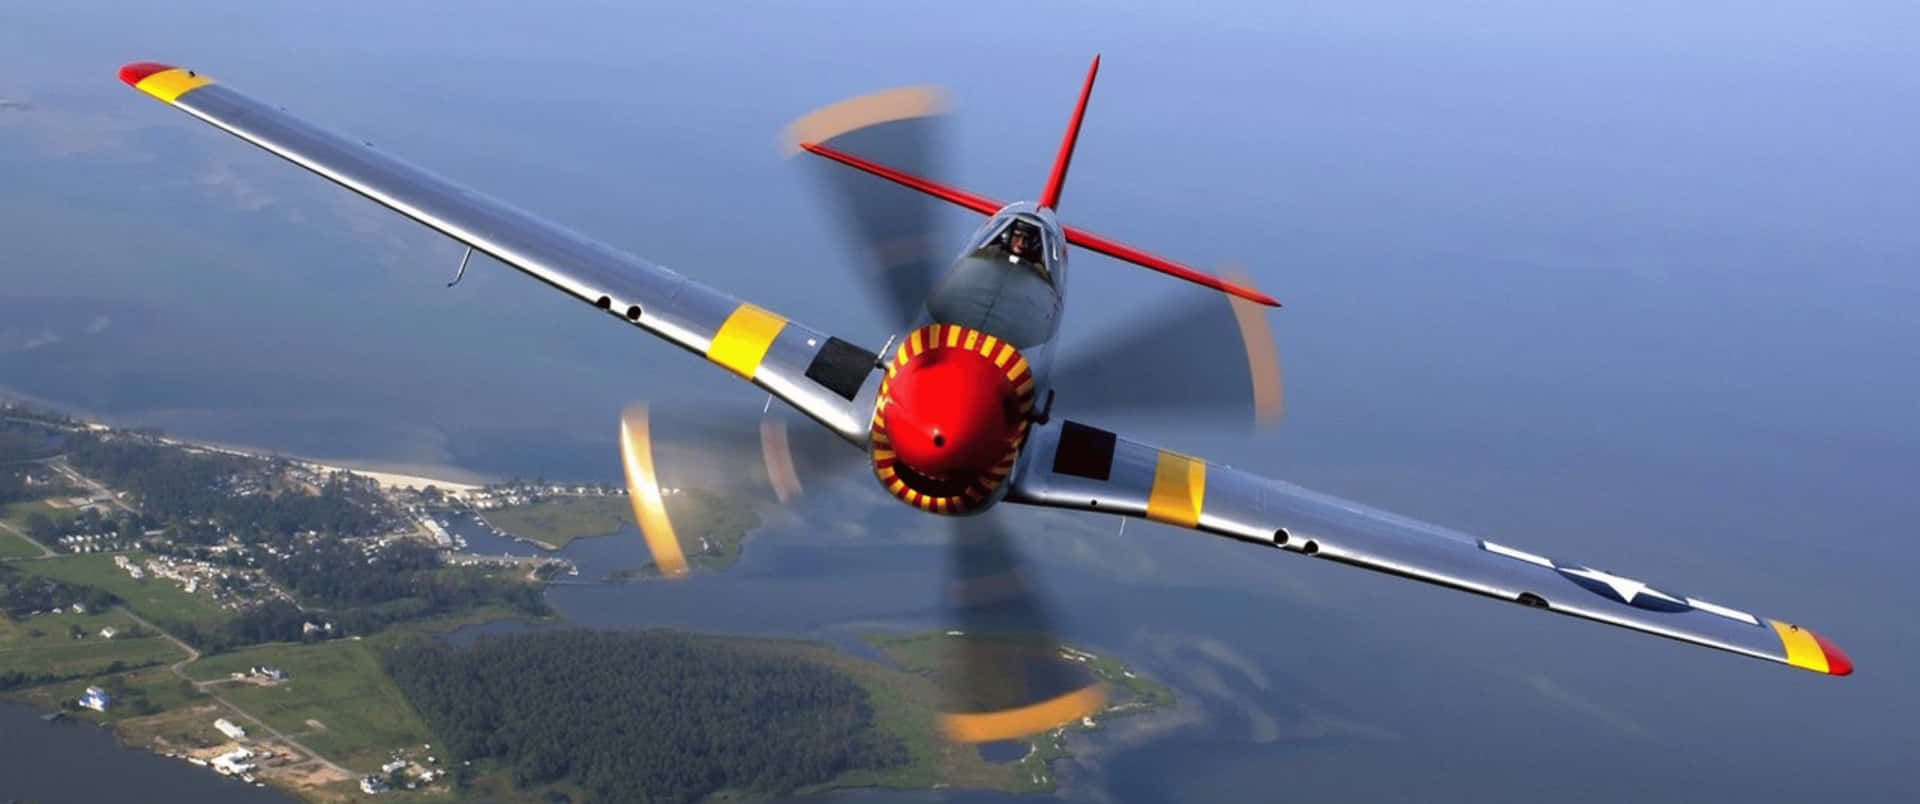 3440x1440p Plane North American P 51 Mustang Background